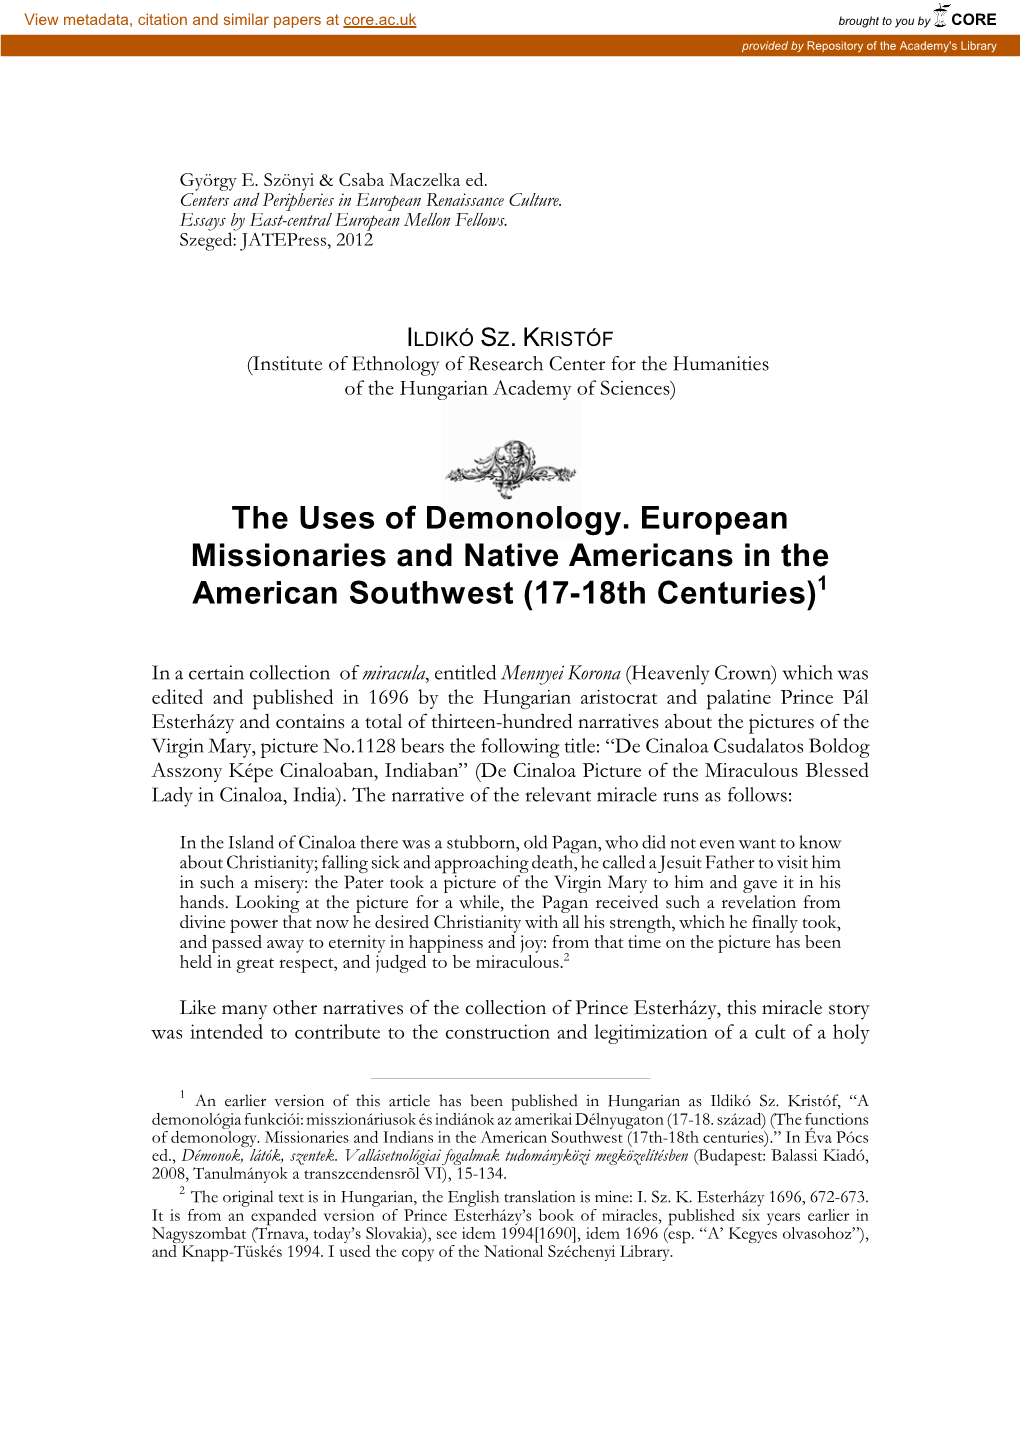 The Uses of Demonology. European Missionaries and Native Americans in the American Southwest (17-18Th Centuries)1